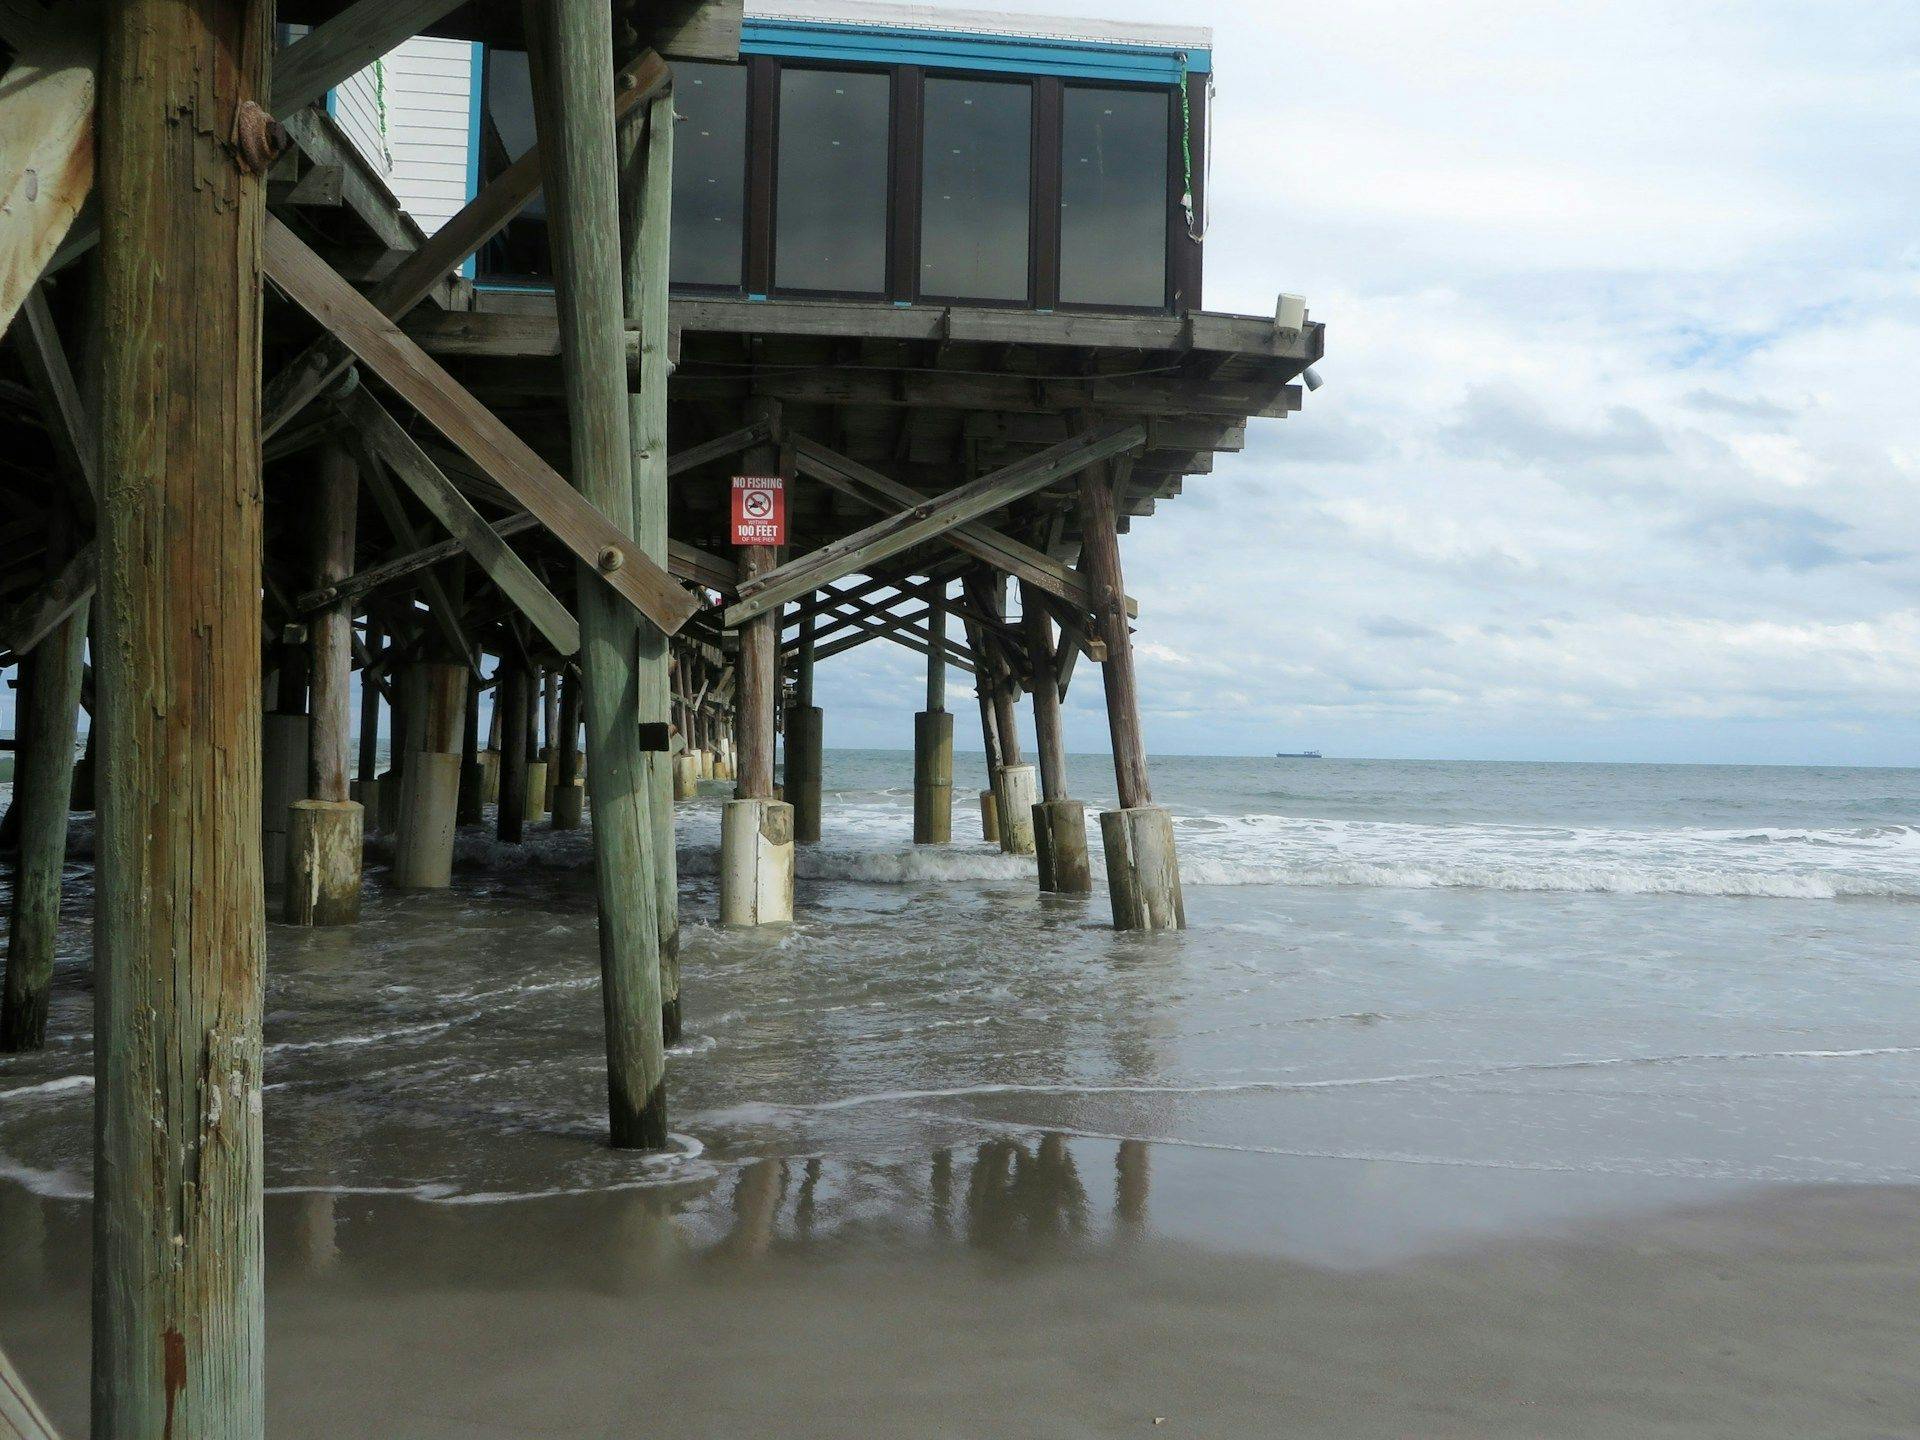 Cocoa Beach Short-Term Rental Regulation: A Guide For Airbnb Hosts